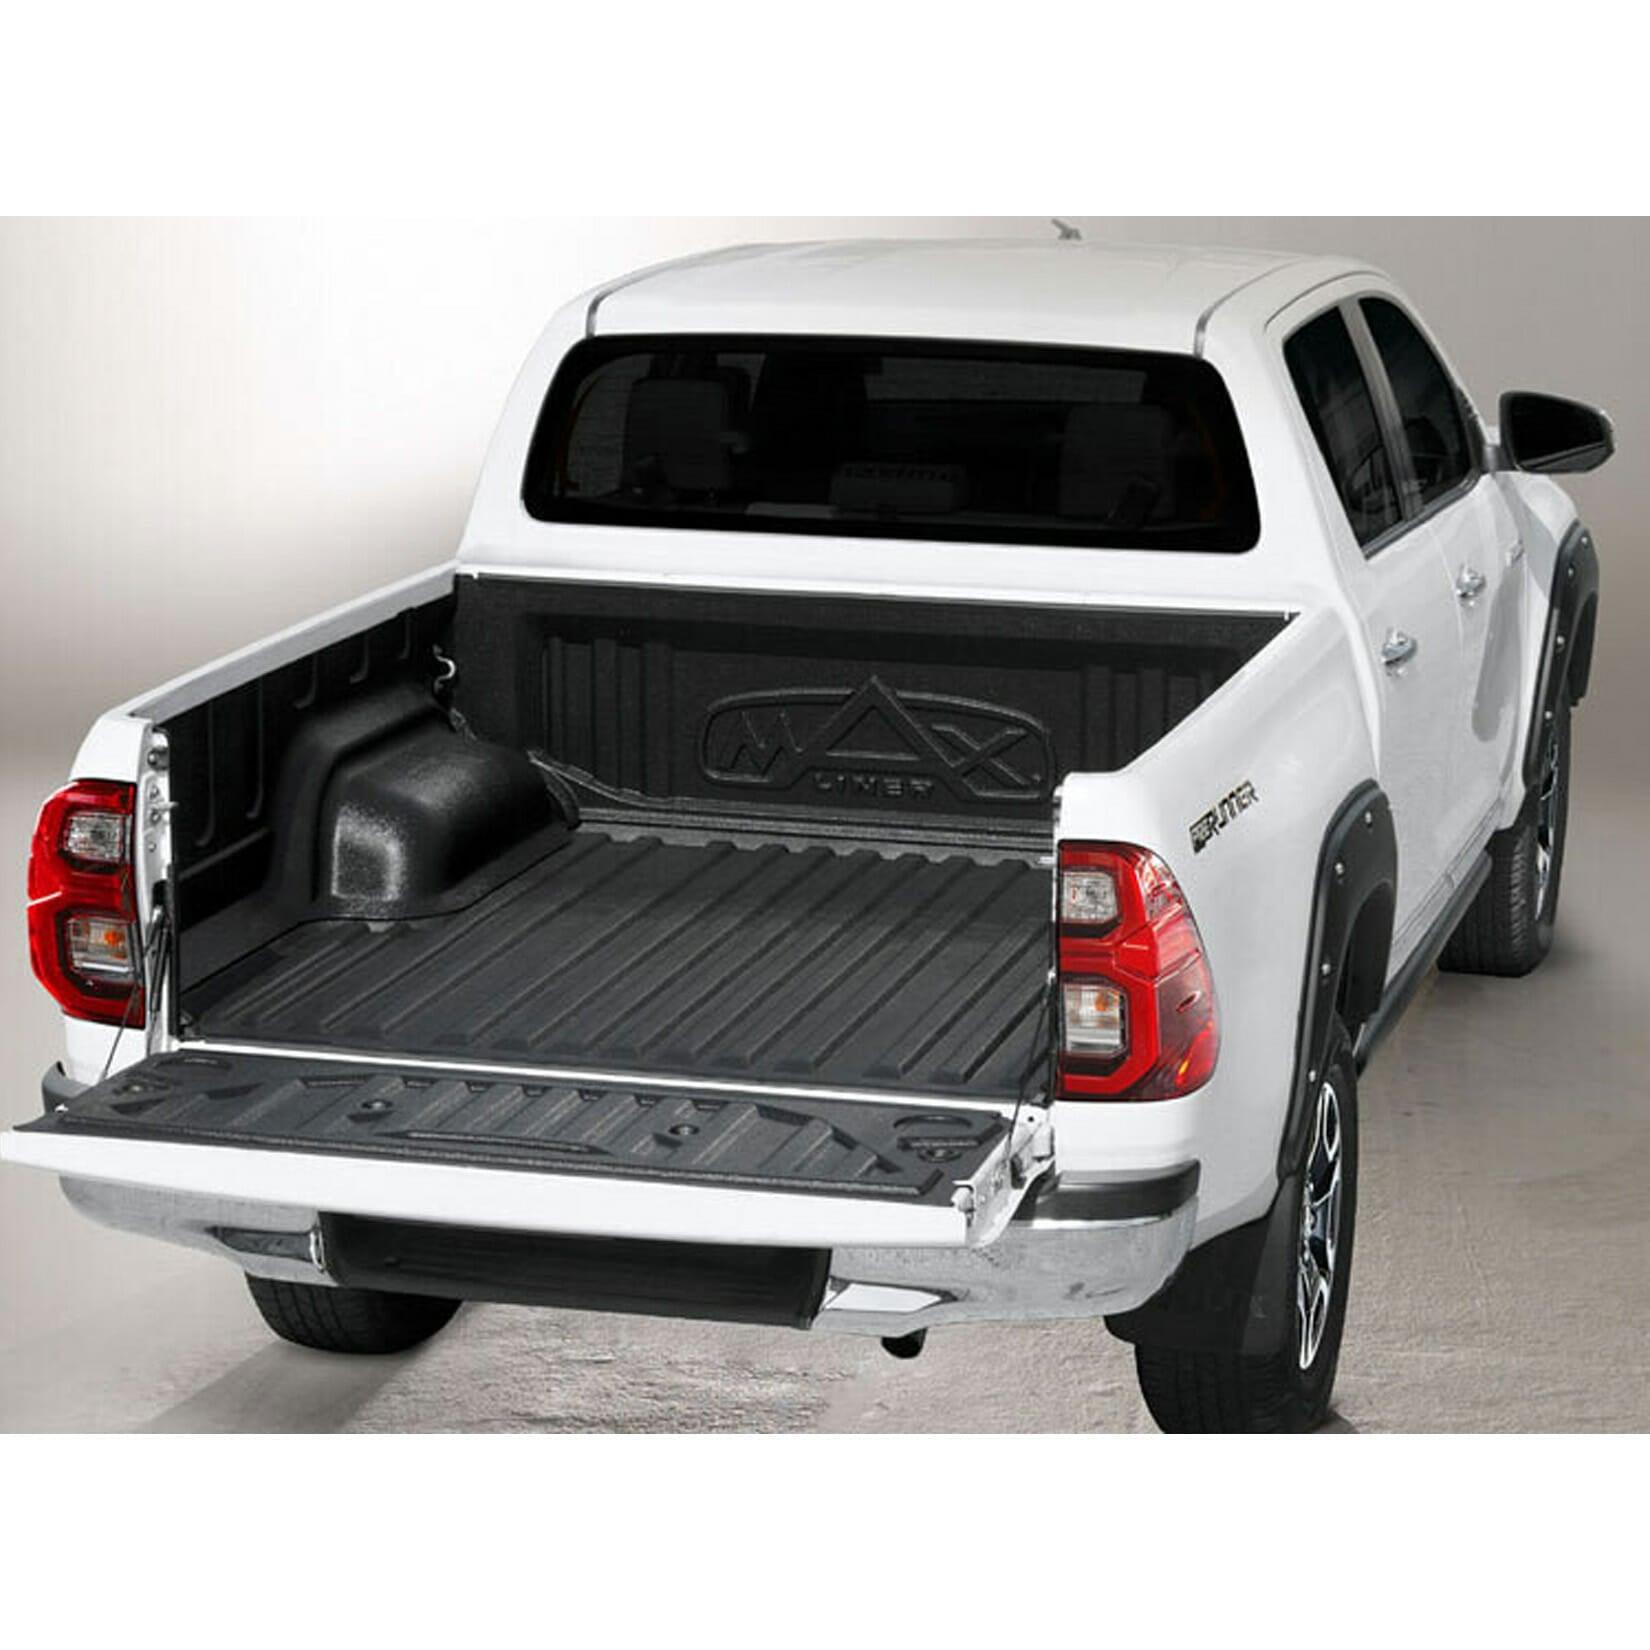 TOYOTA HILUX DOUBLE CAB 2015 ON 5 PC LOAD LINER - Storm Xccessories2